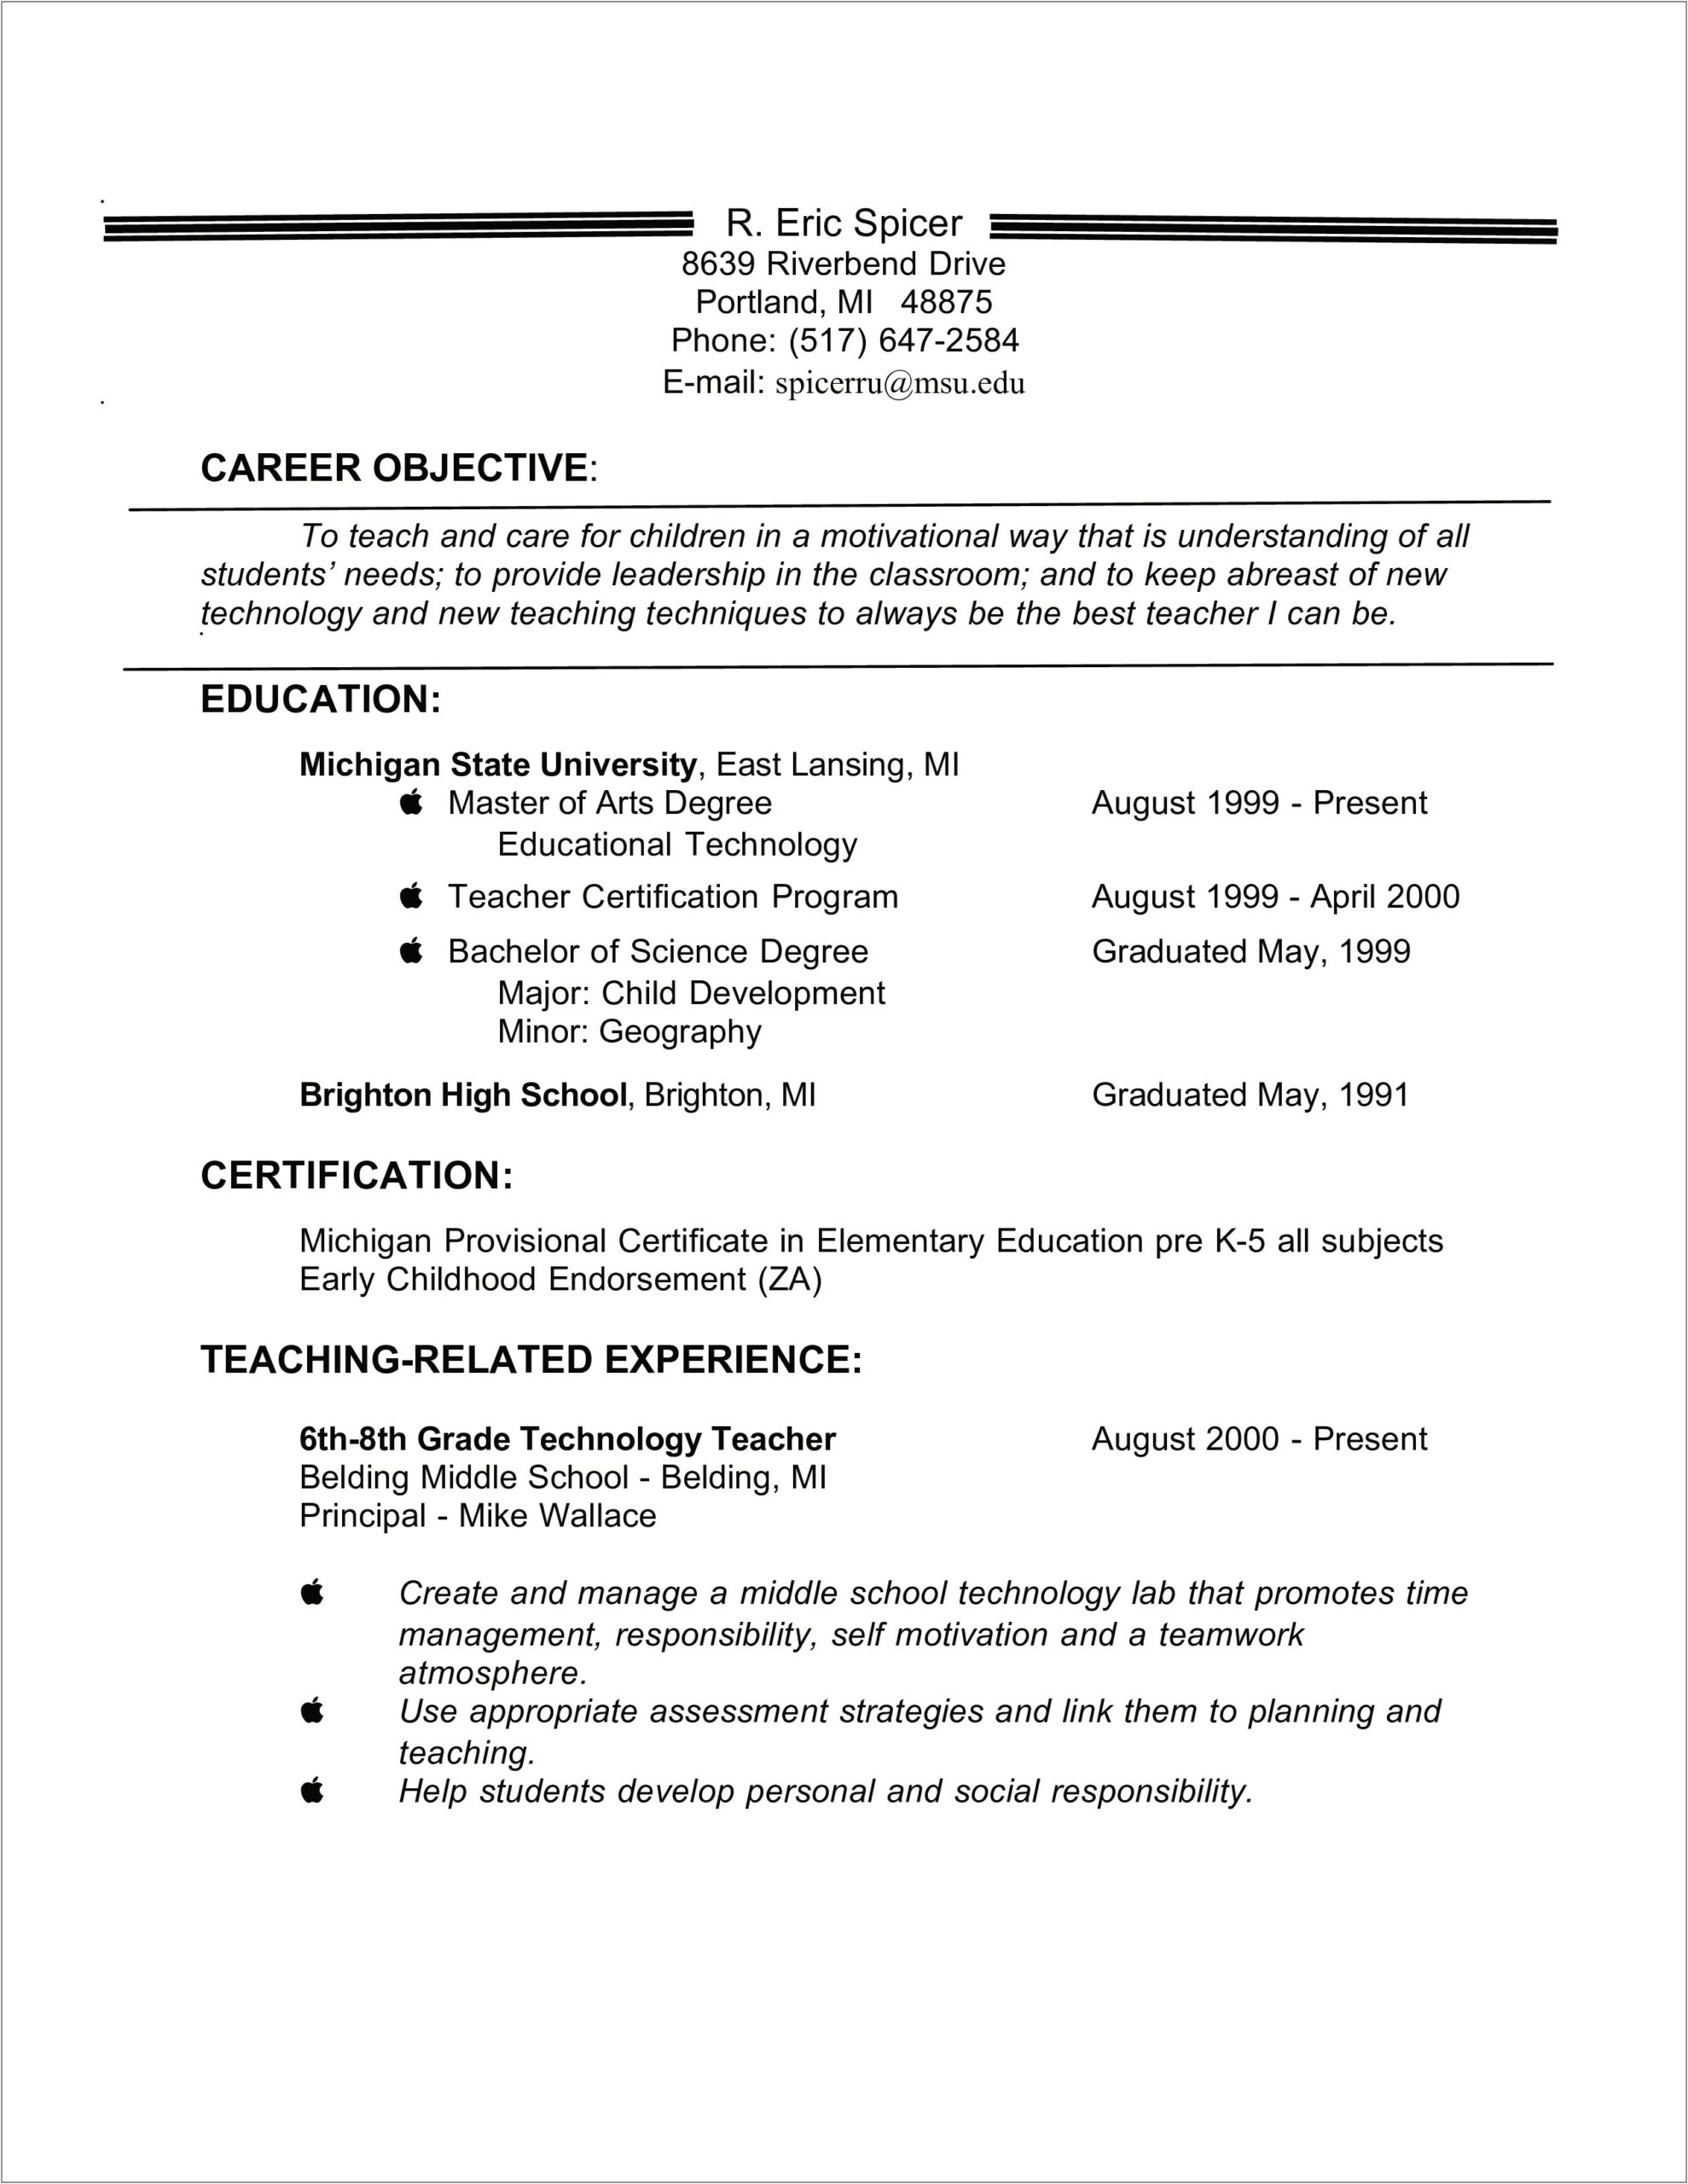 Resume Objective Examples For Legal Assistant